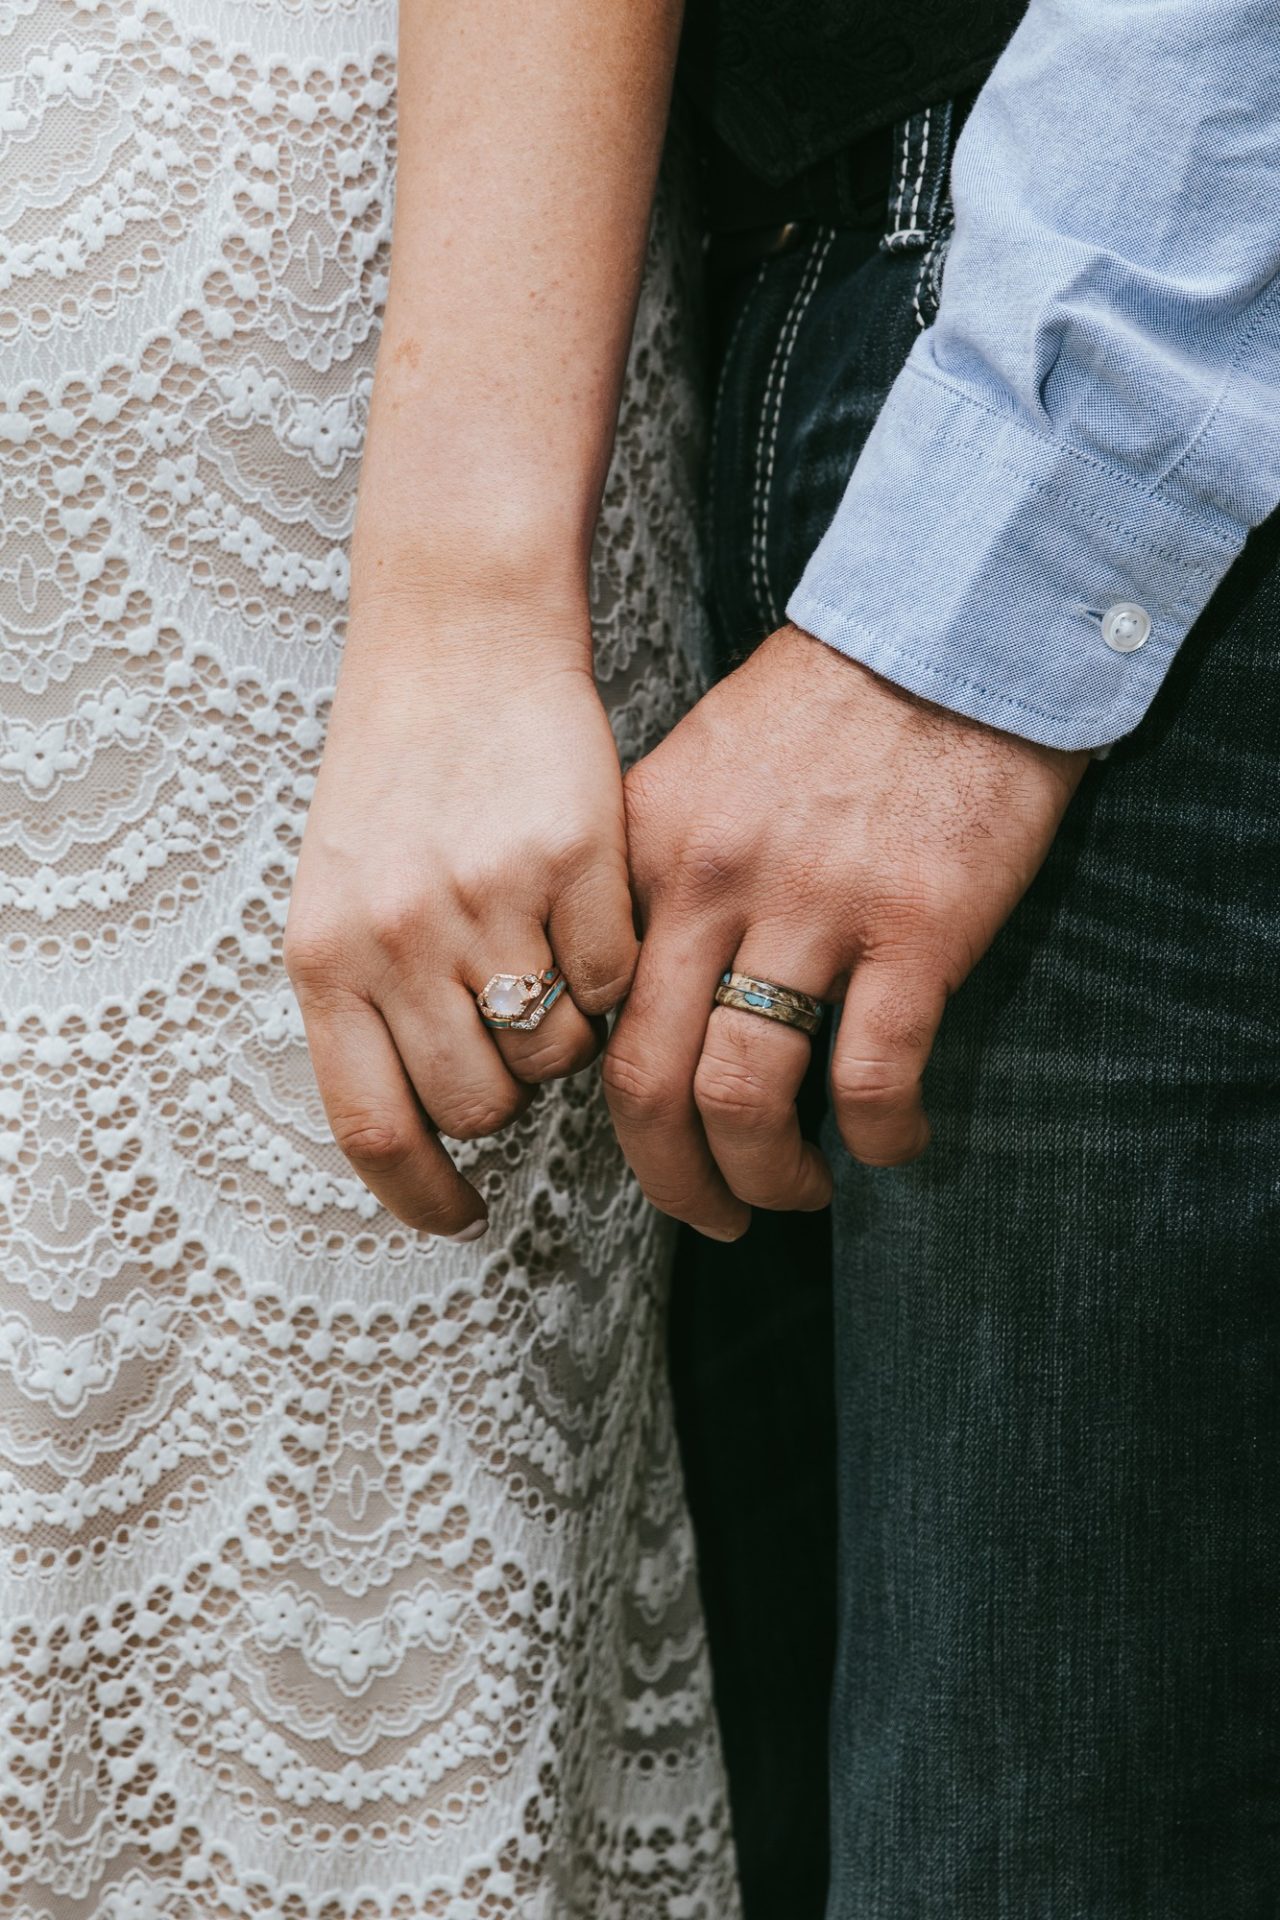 A close up picture of a bride and groom holding hands, showing off their sparkling wedding rings